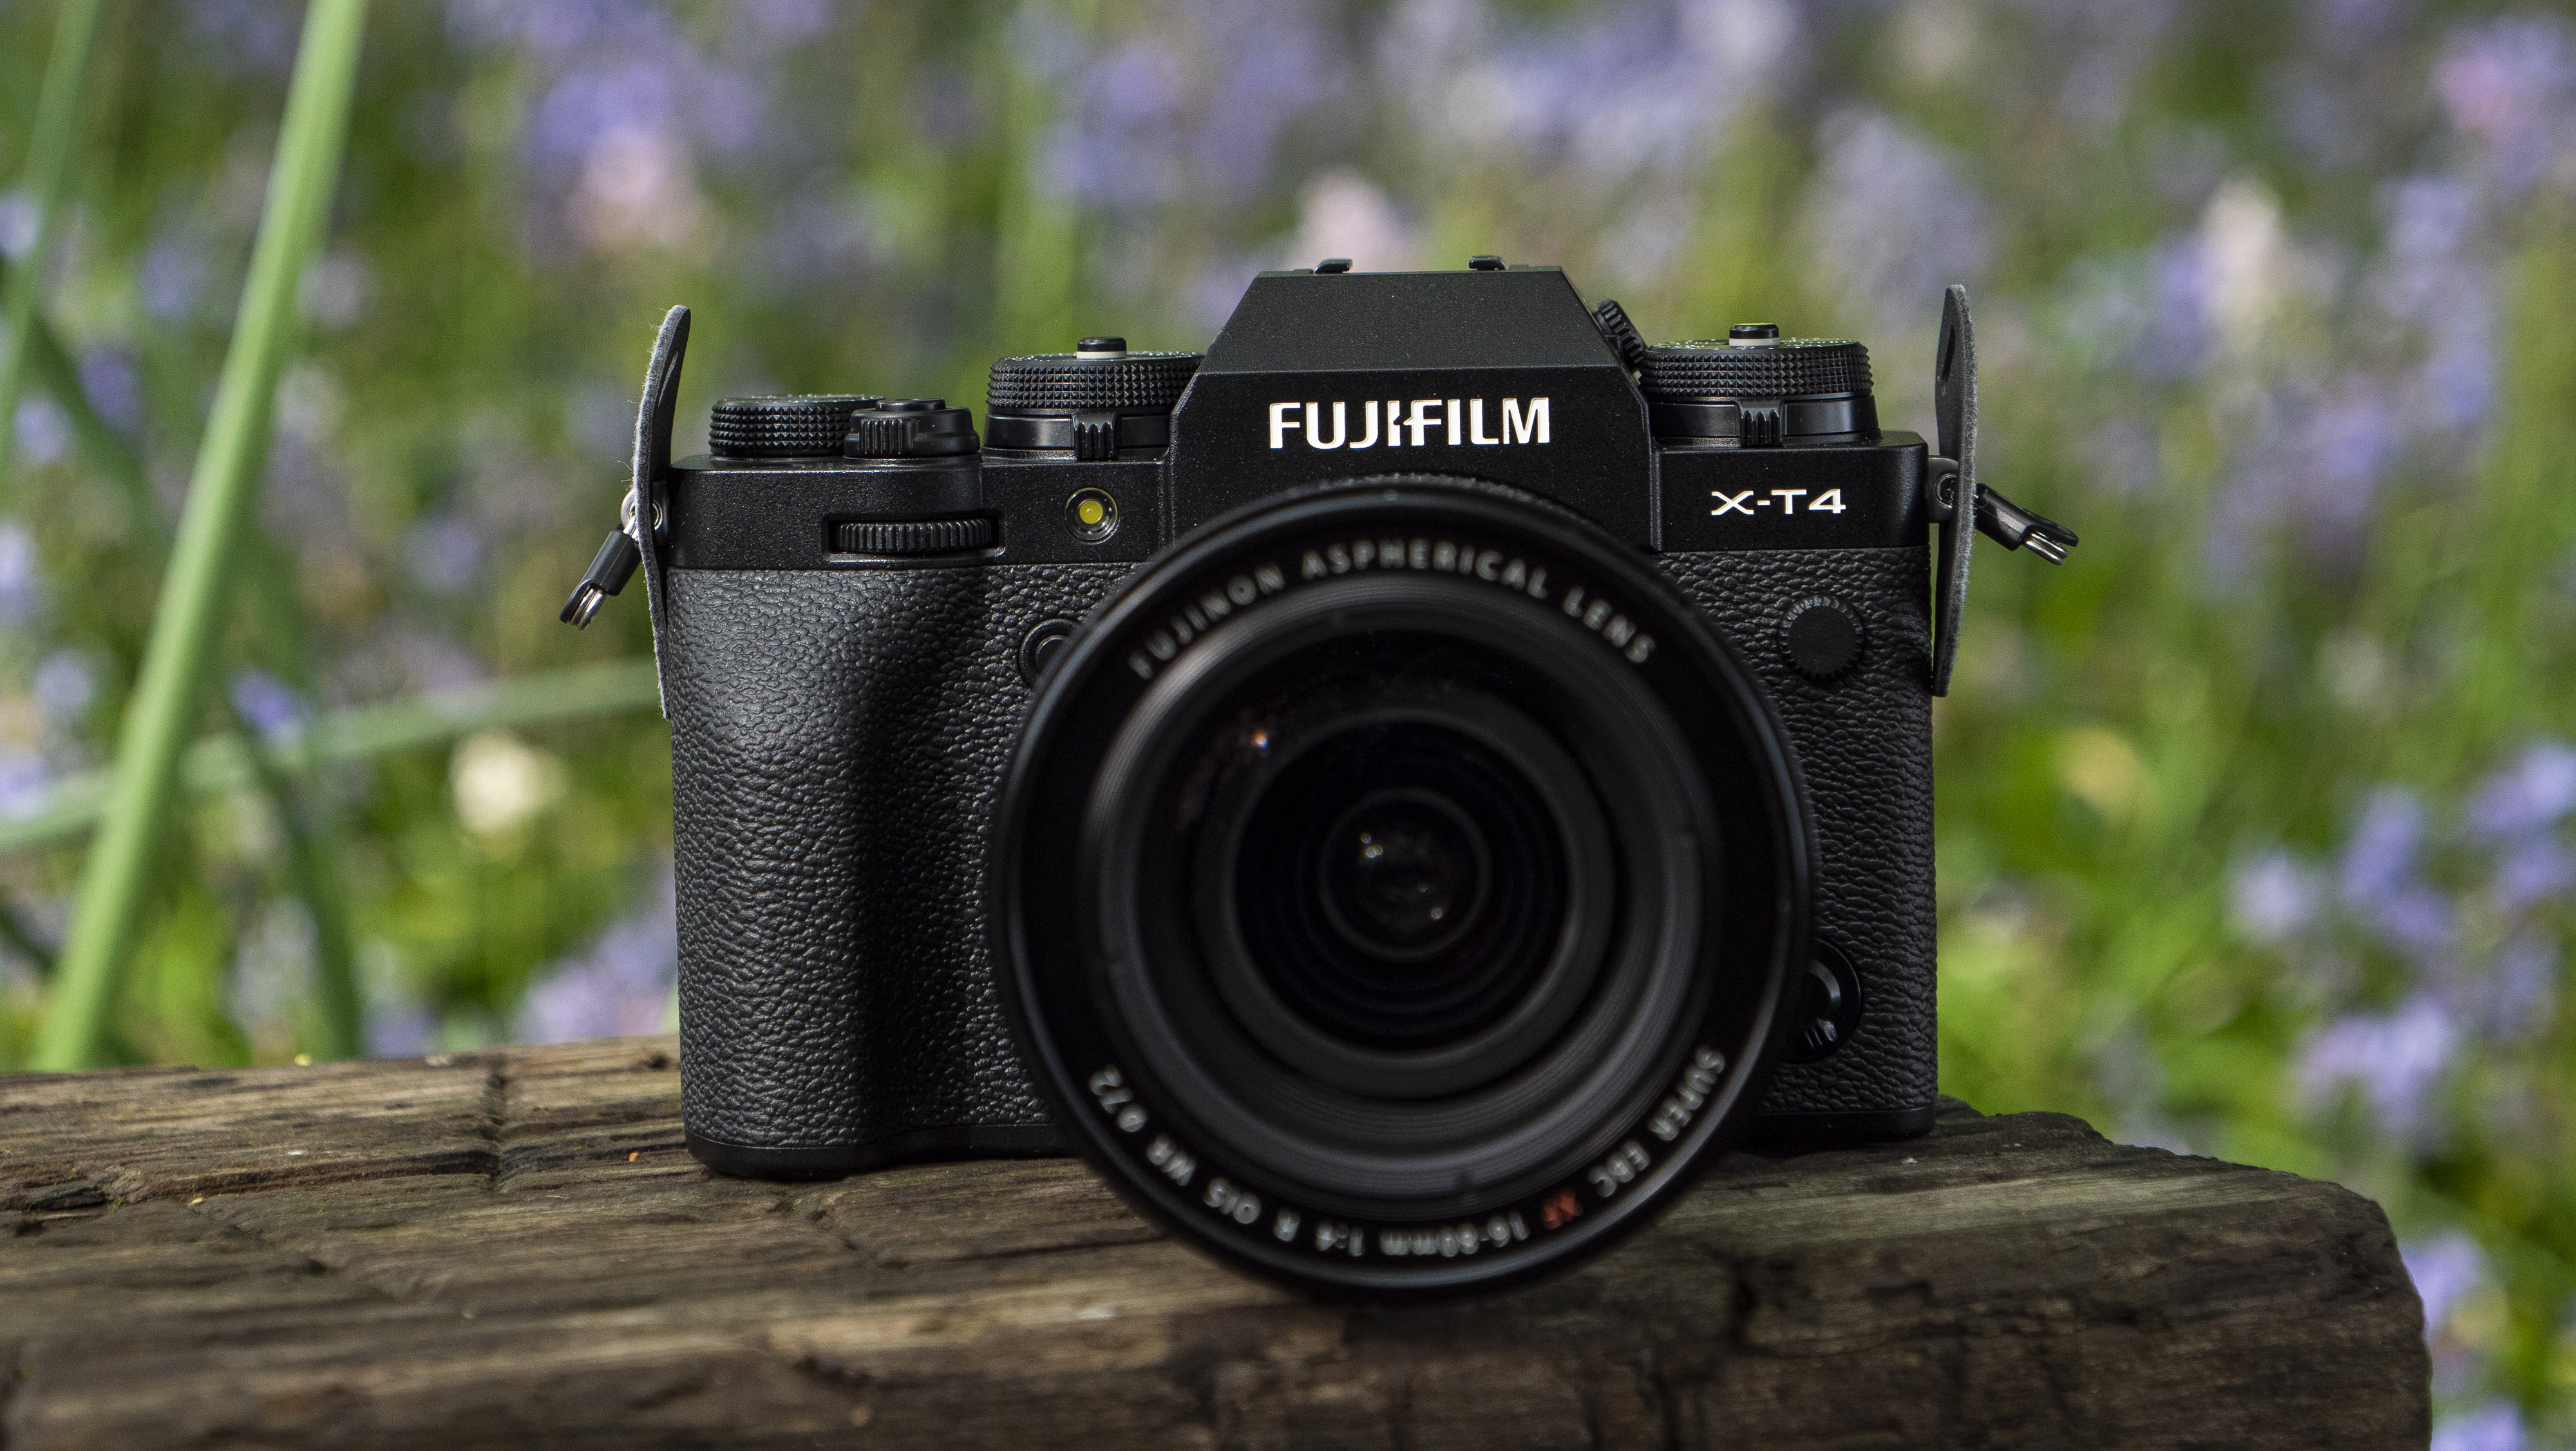 The Fujifilm X-T4 placed on a wooden bench with the new 16-80mm kit lens.